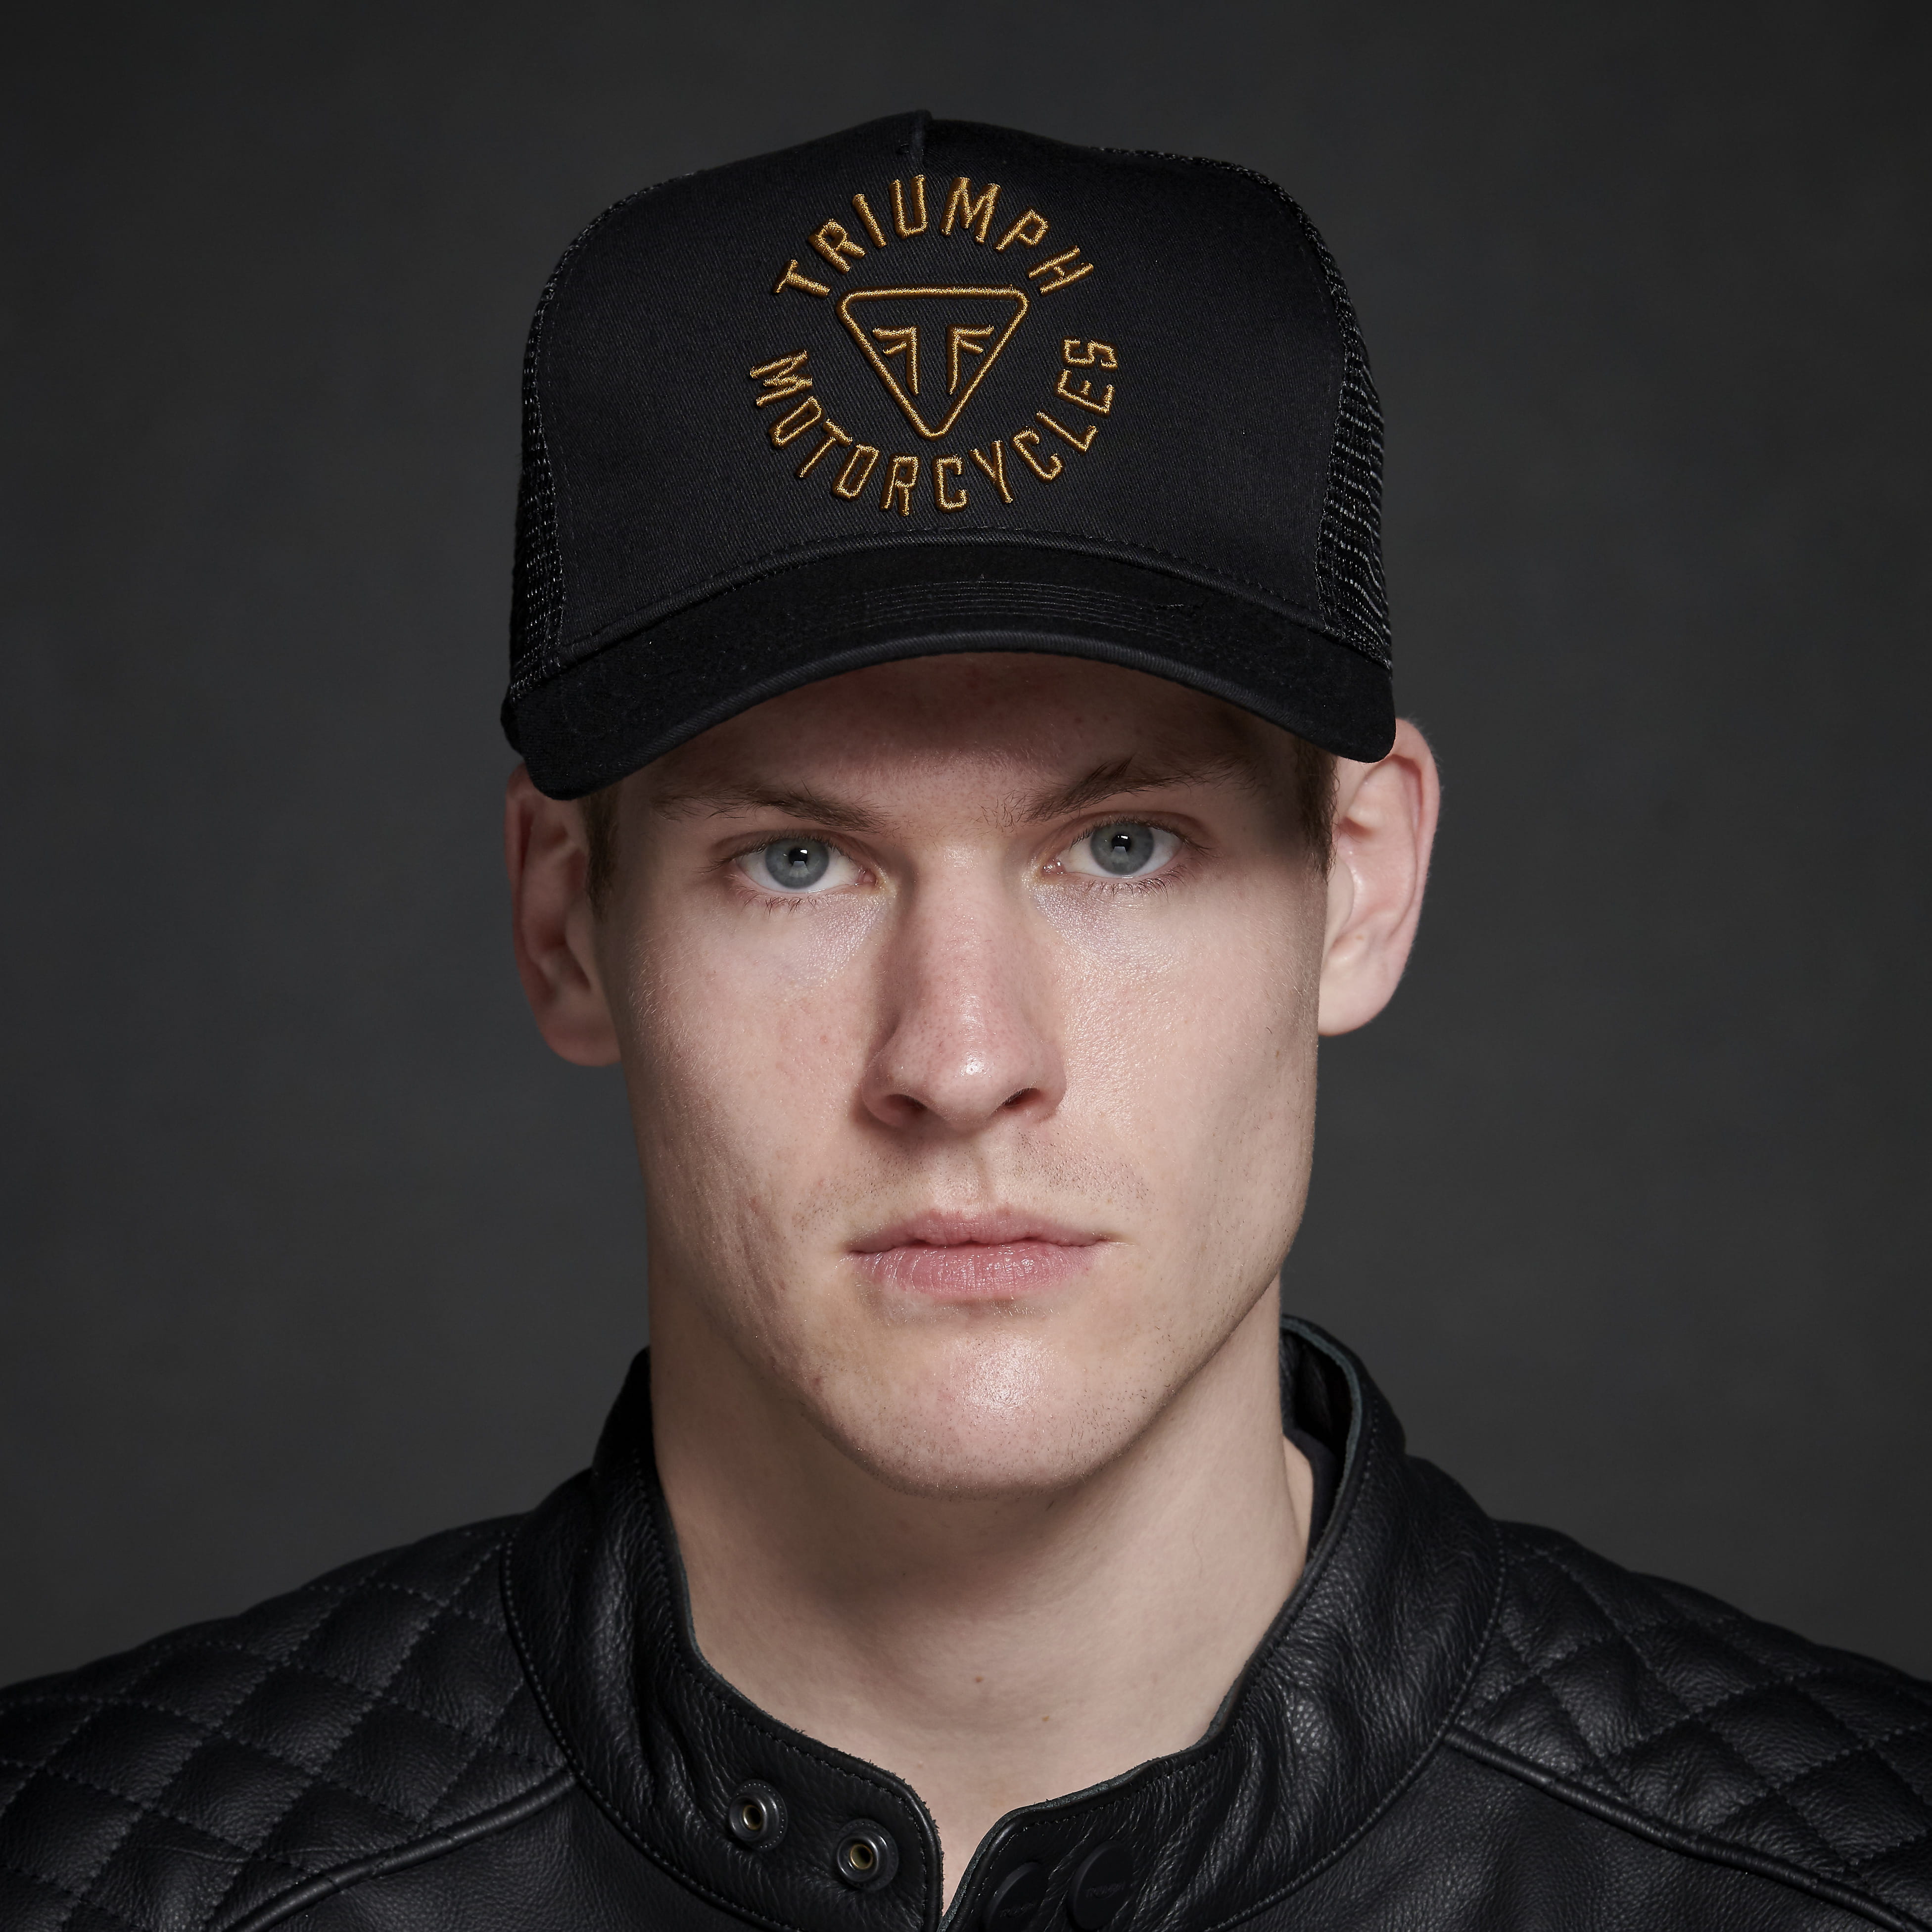 Taylor Trucker Cap in Black and Gold